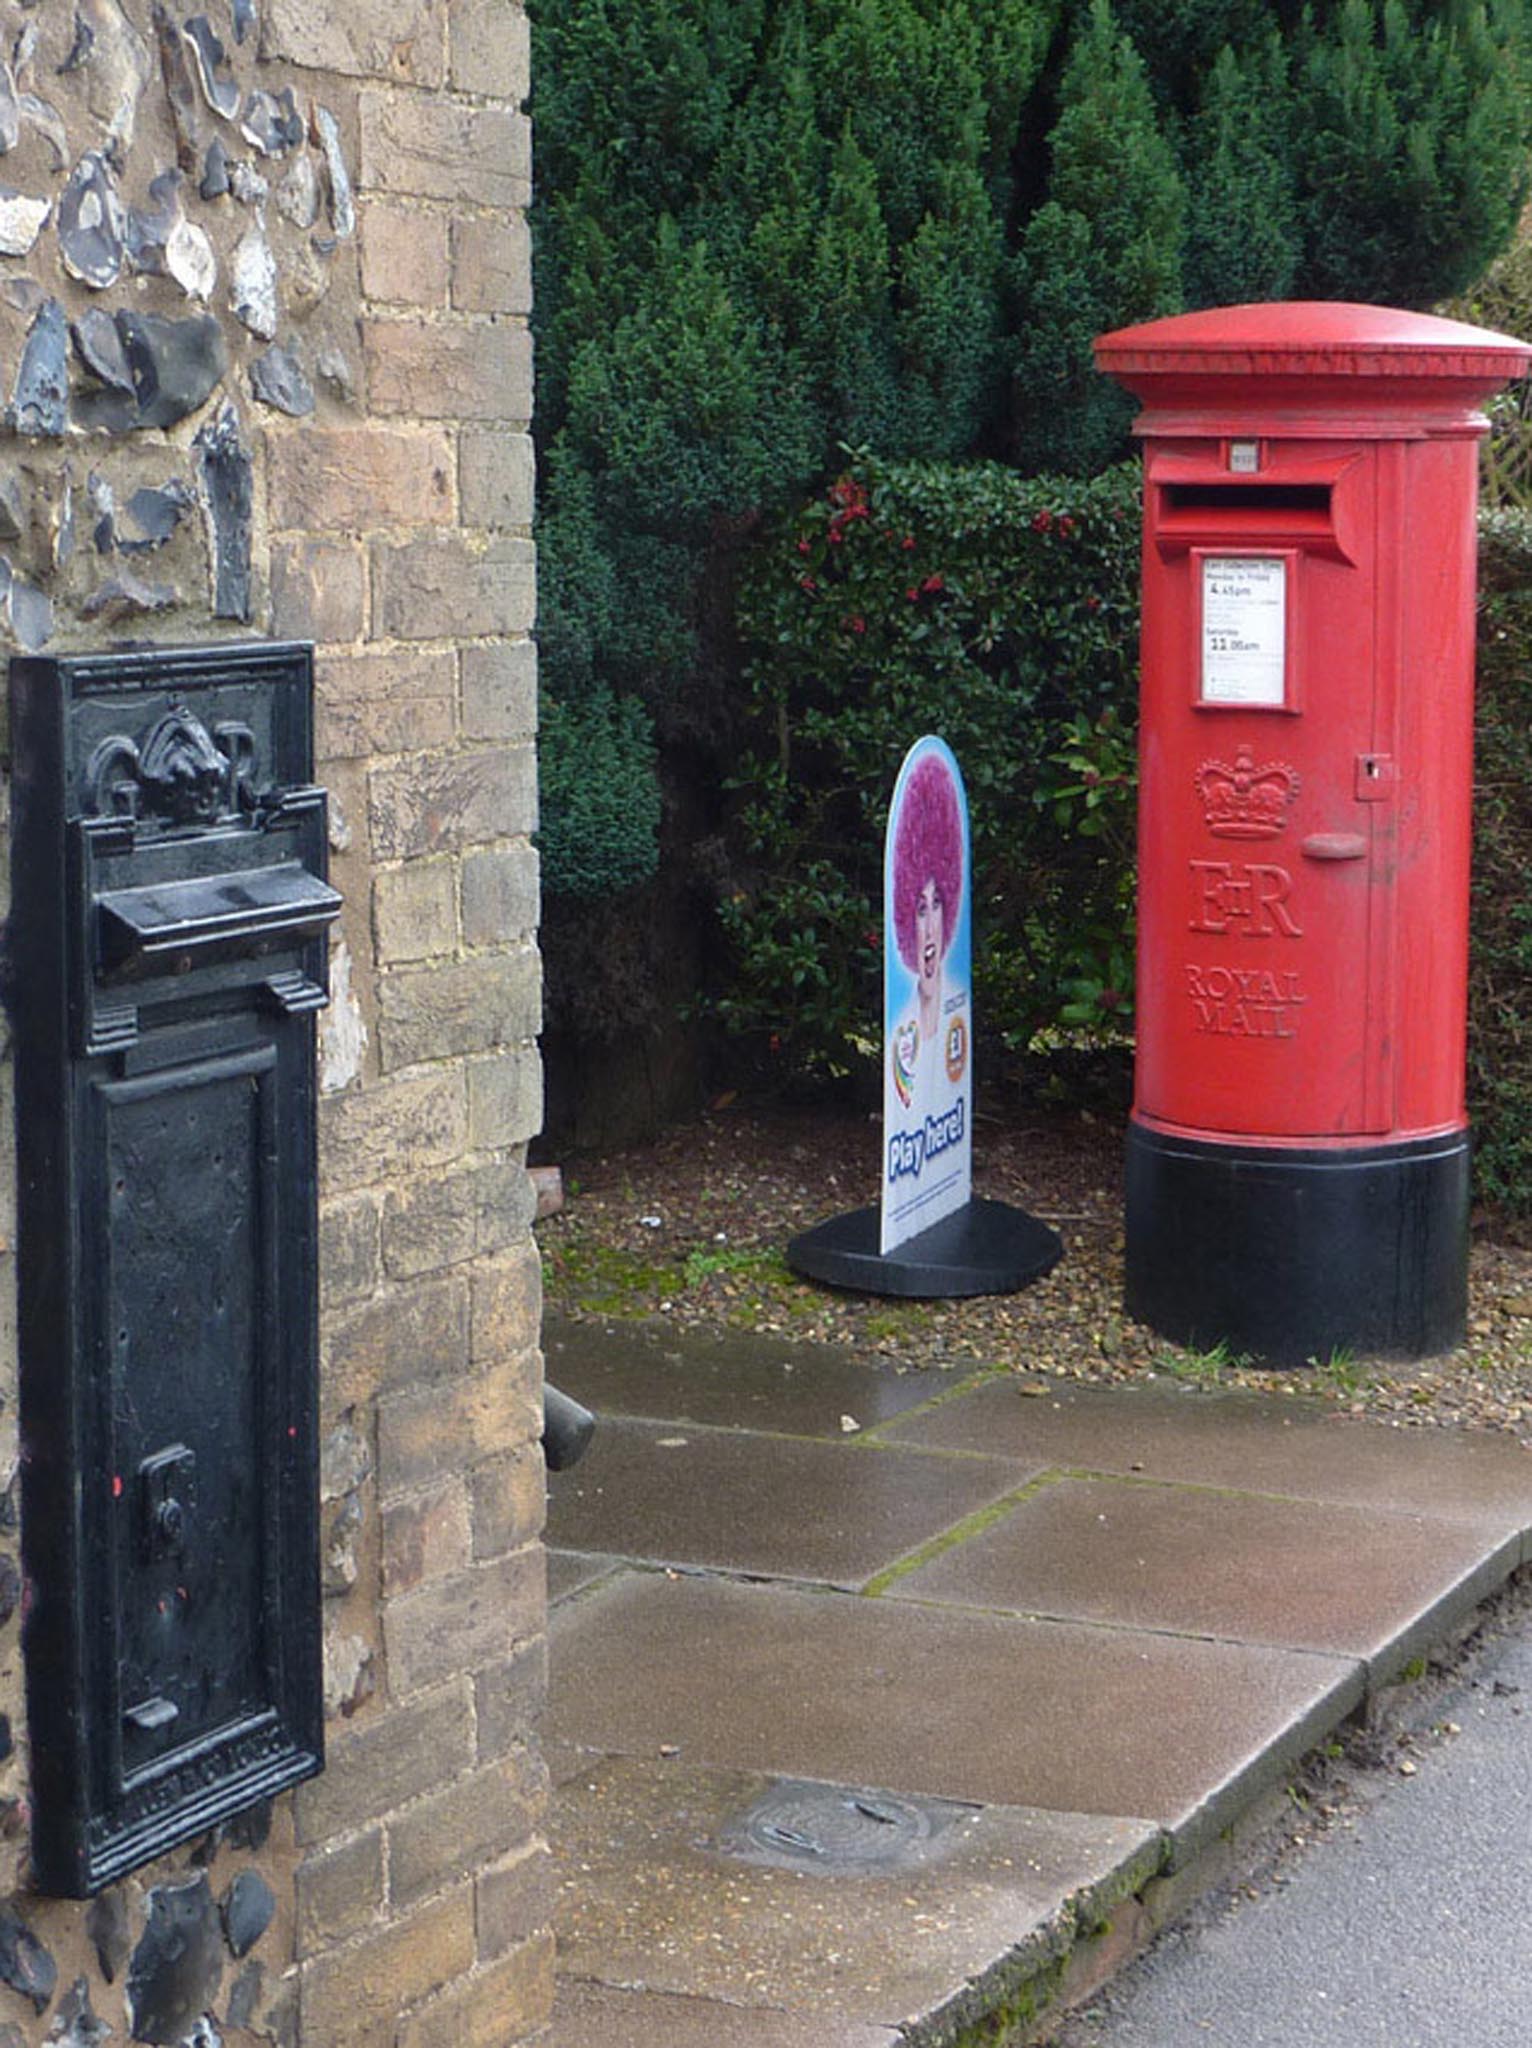 E2R pillar box, 1990s, with earlier decommissioned GR wall box. East Anglia. Andrew R Young